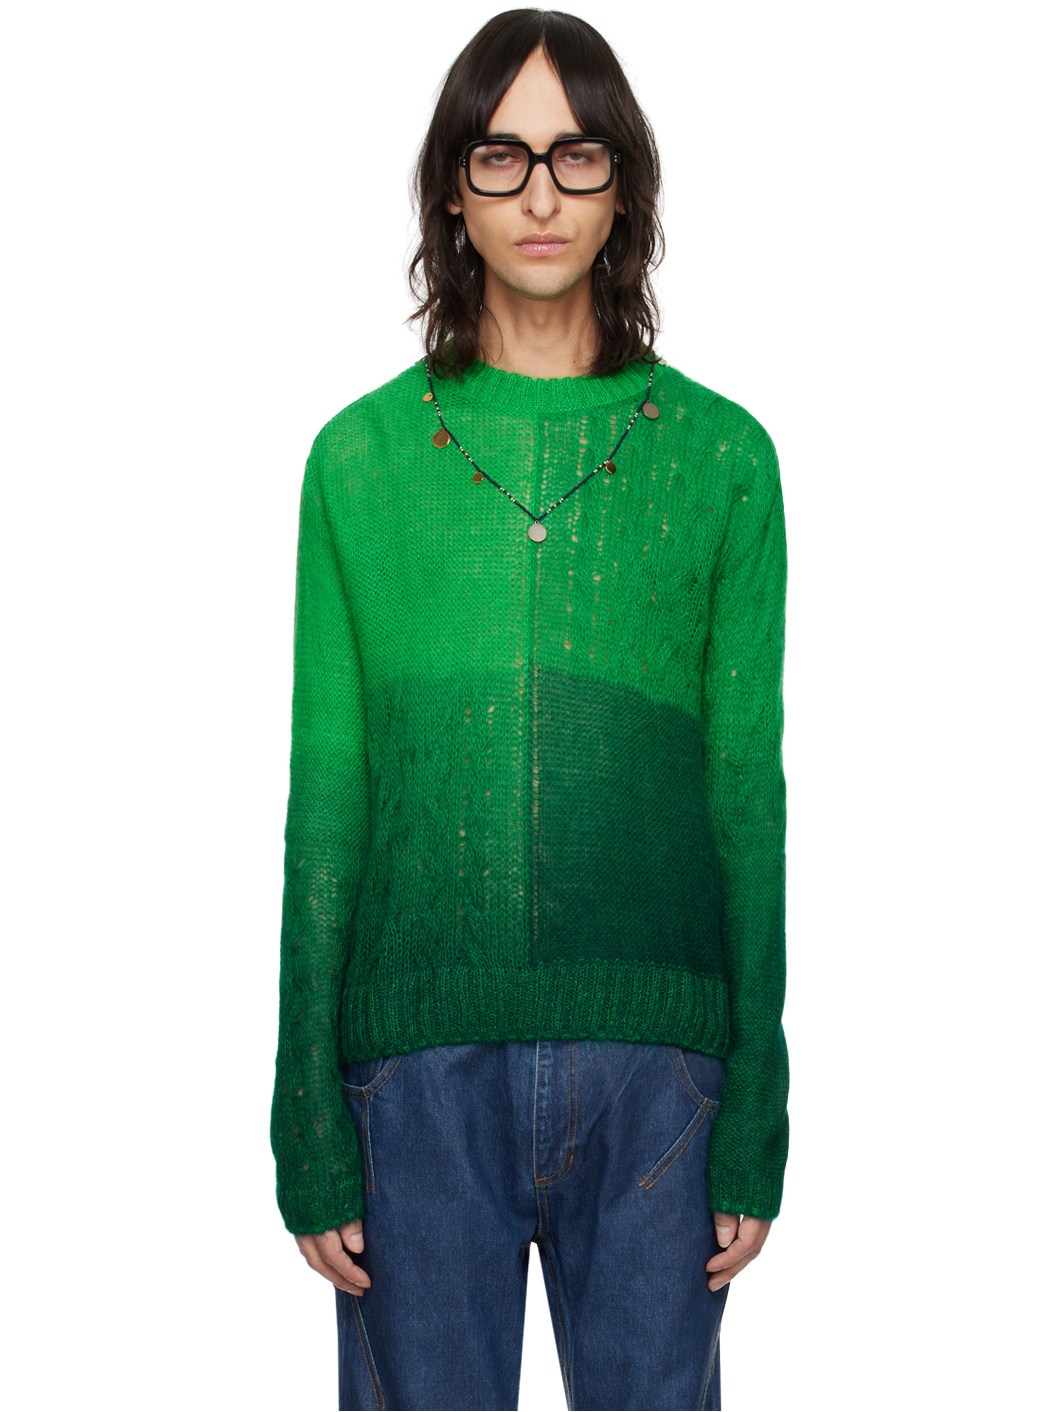 Green Foresk Sweater - 1